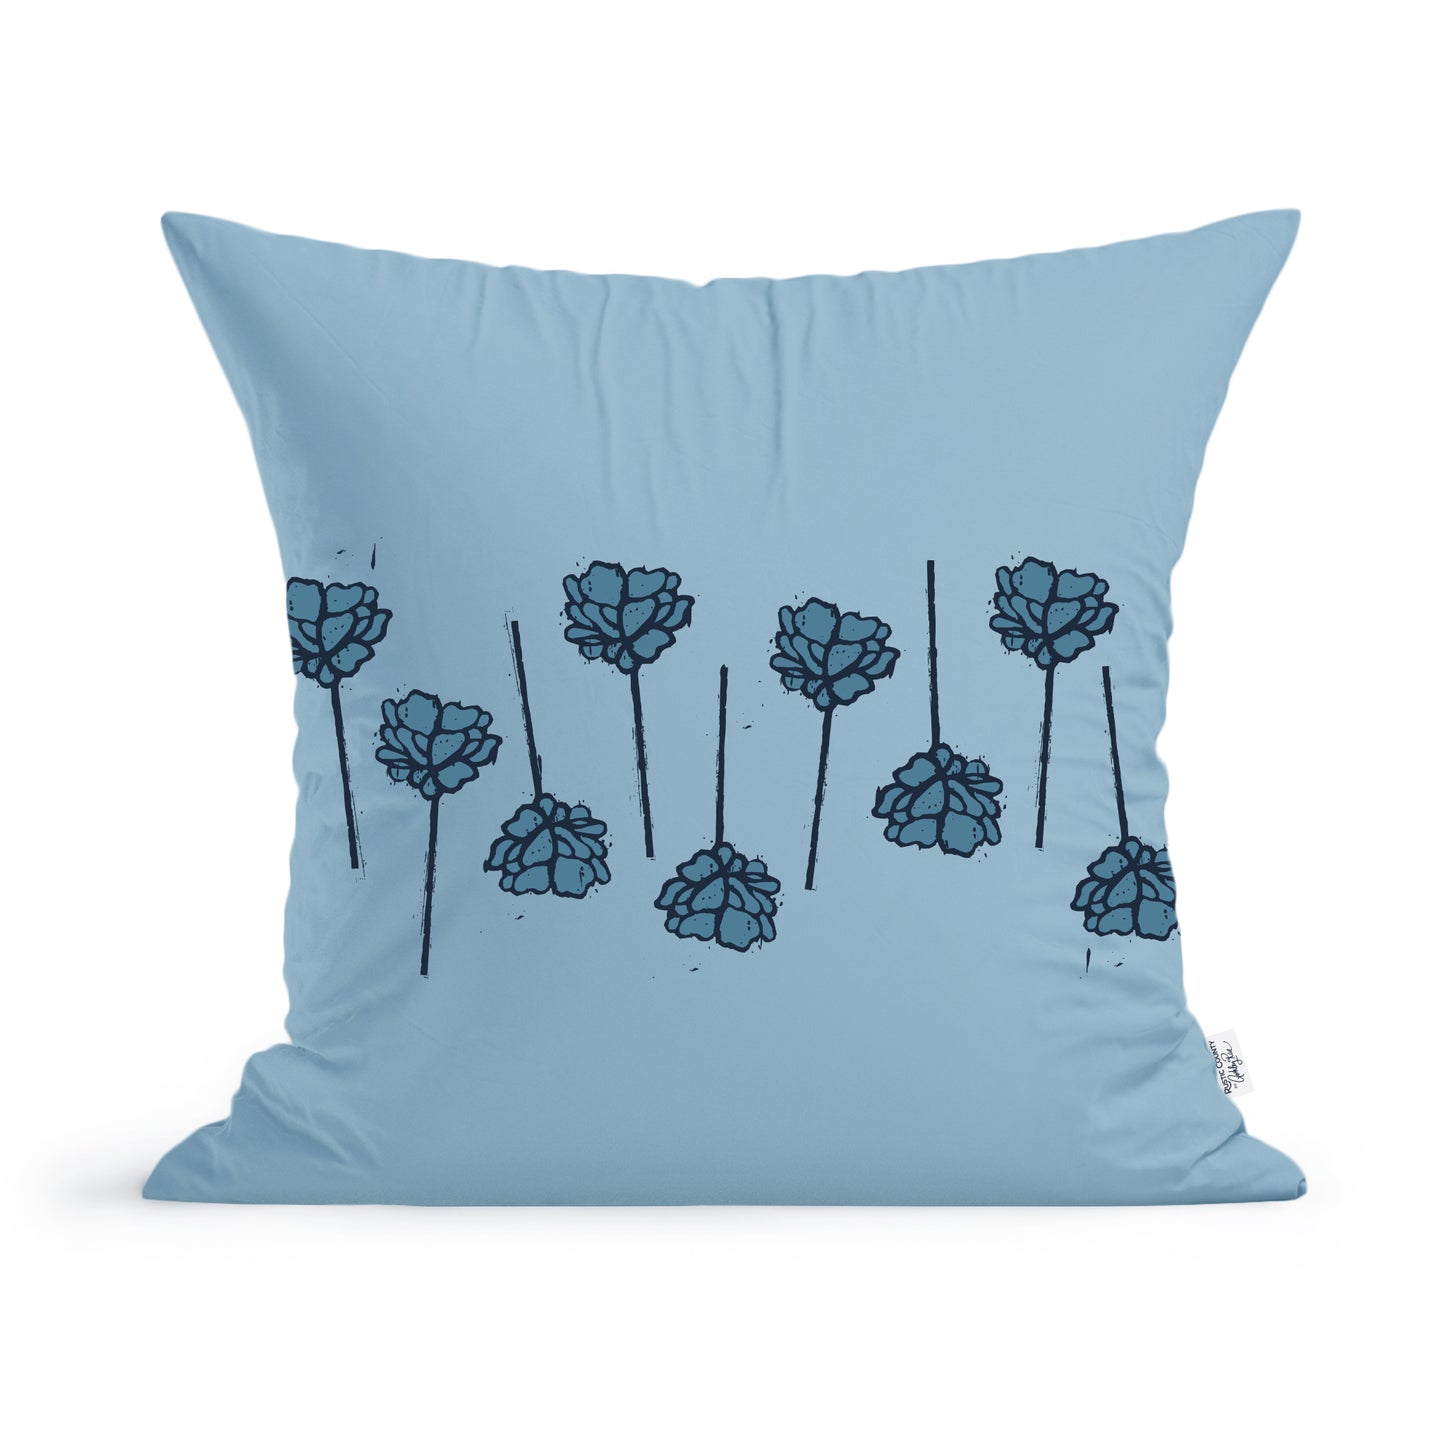 Fresh Florals Pillow by Rustic County featuring a pattern of black line-art flowers. The design is simple yet elegant, suitable for modern decor, making it a cozy stylish upgrade.